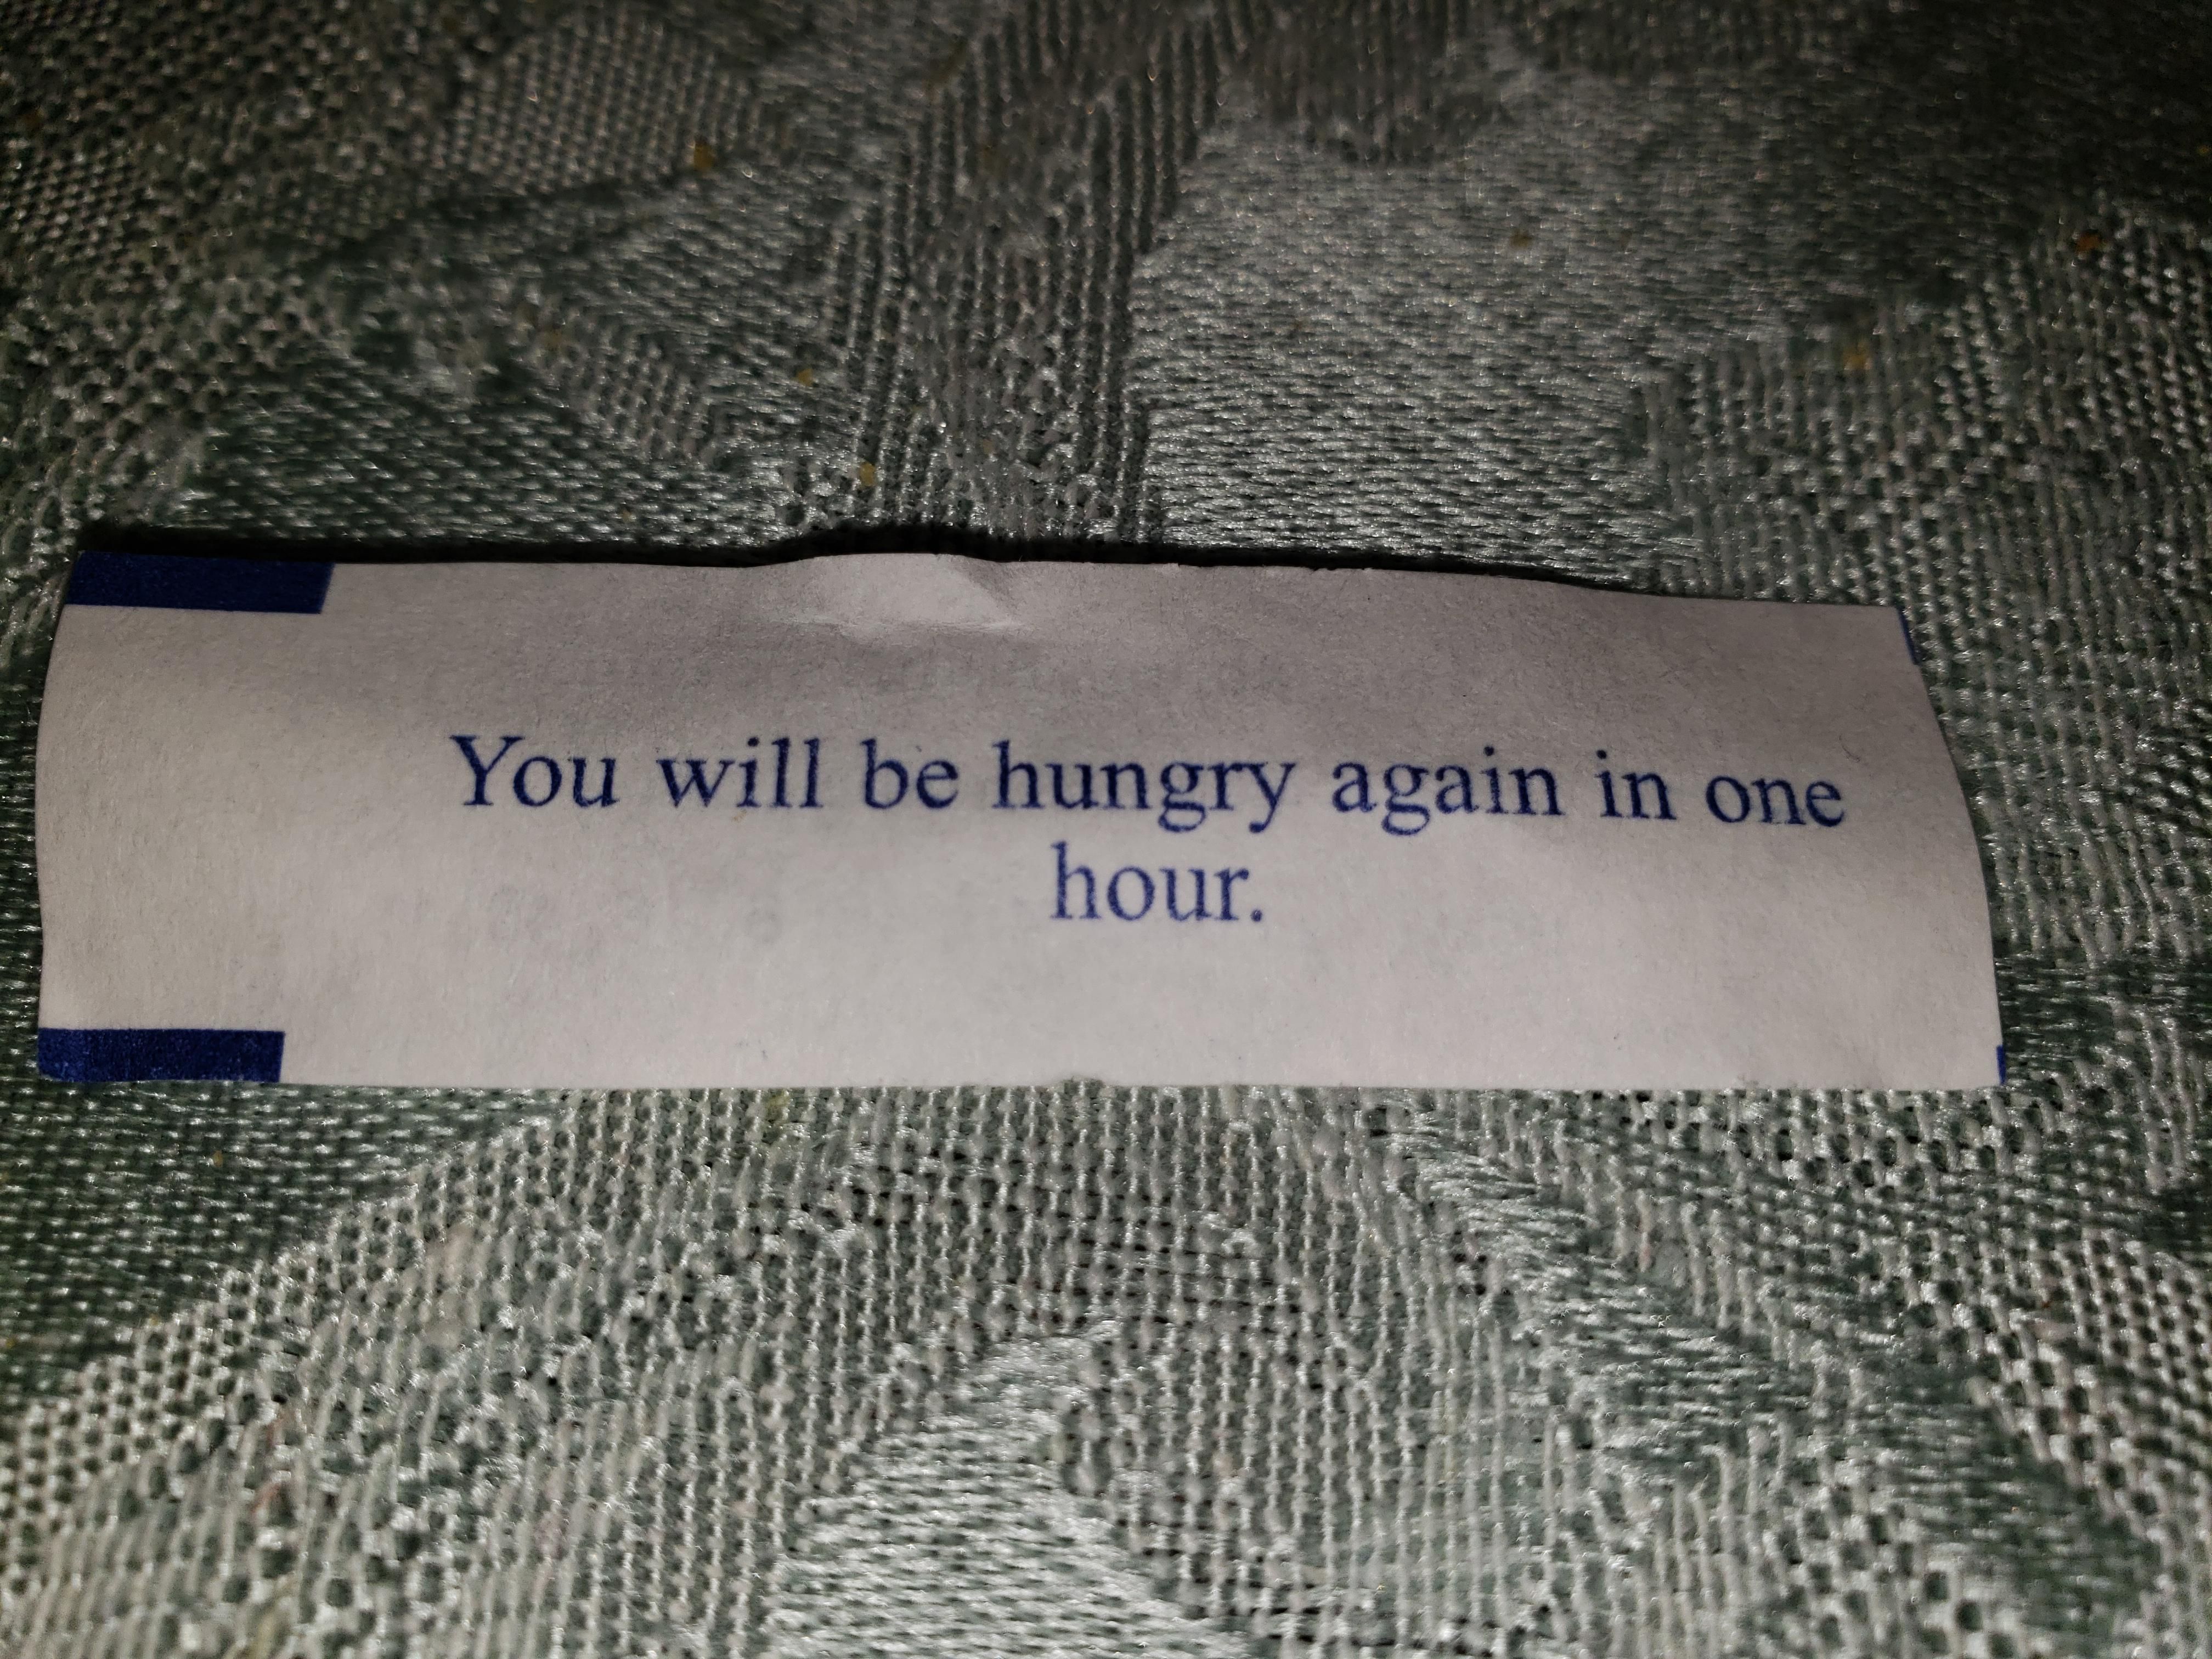 Inside my fortune cookie tonight